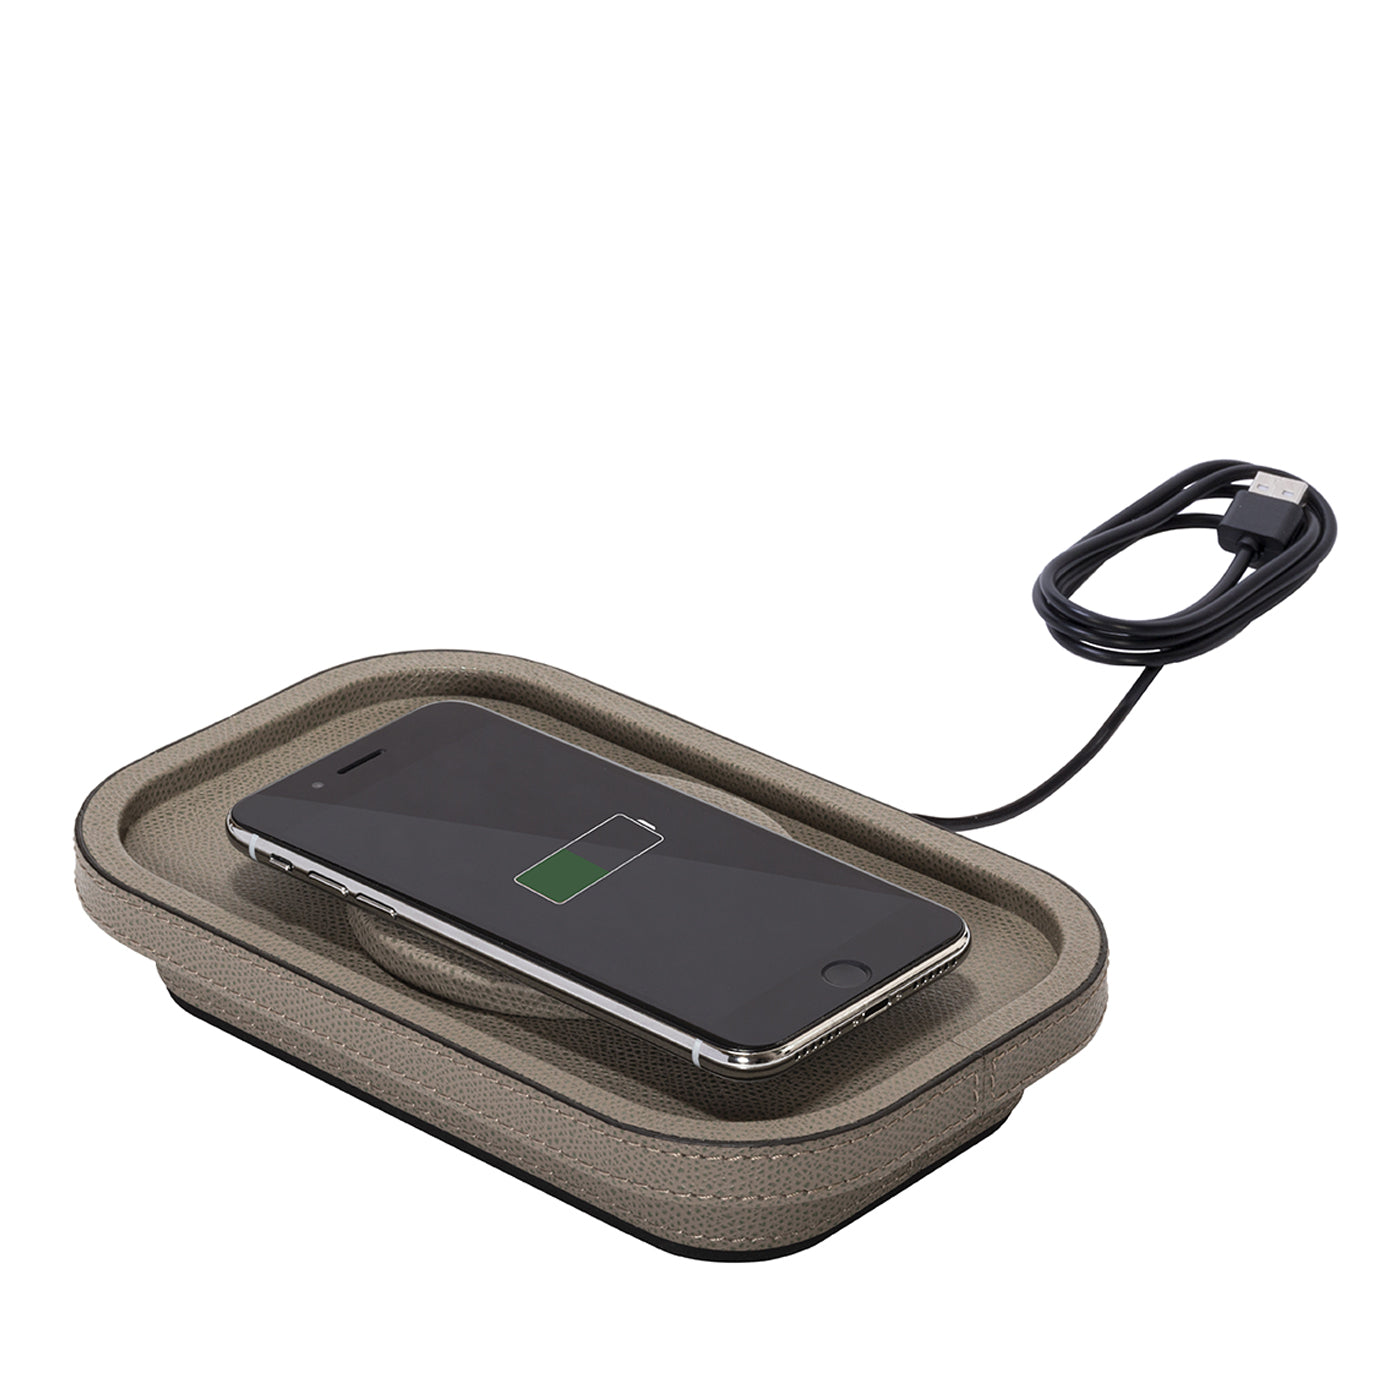 Polo Fast Wireless Charger - Alternative view 1